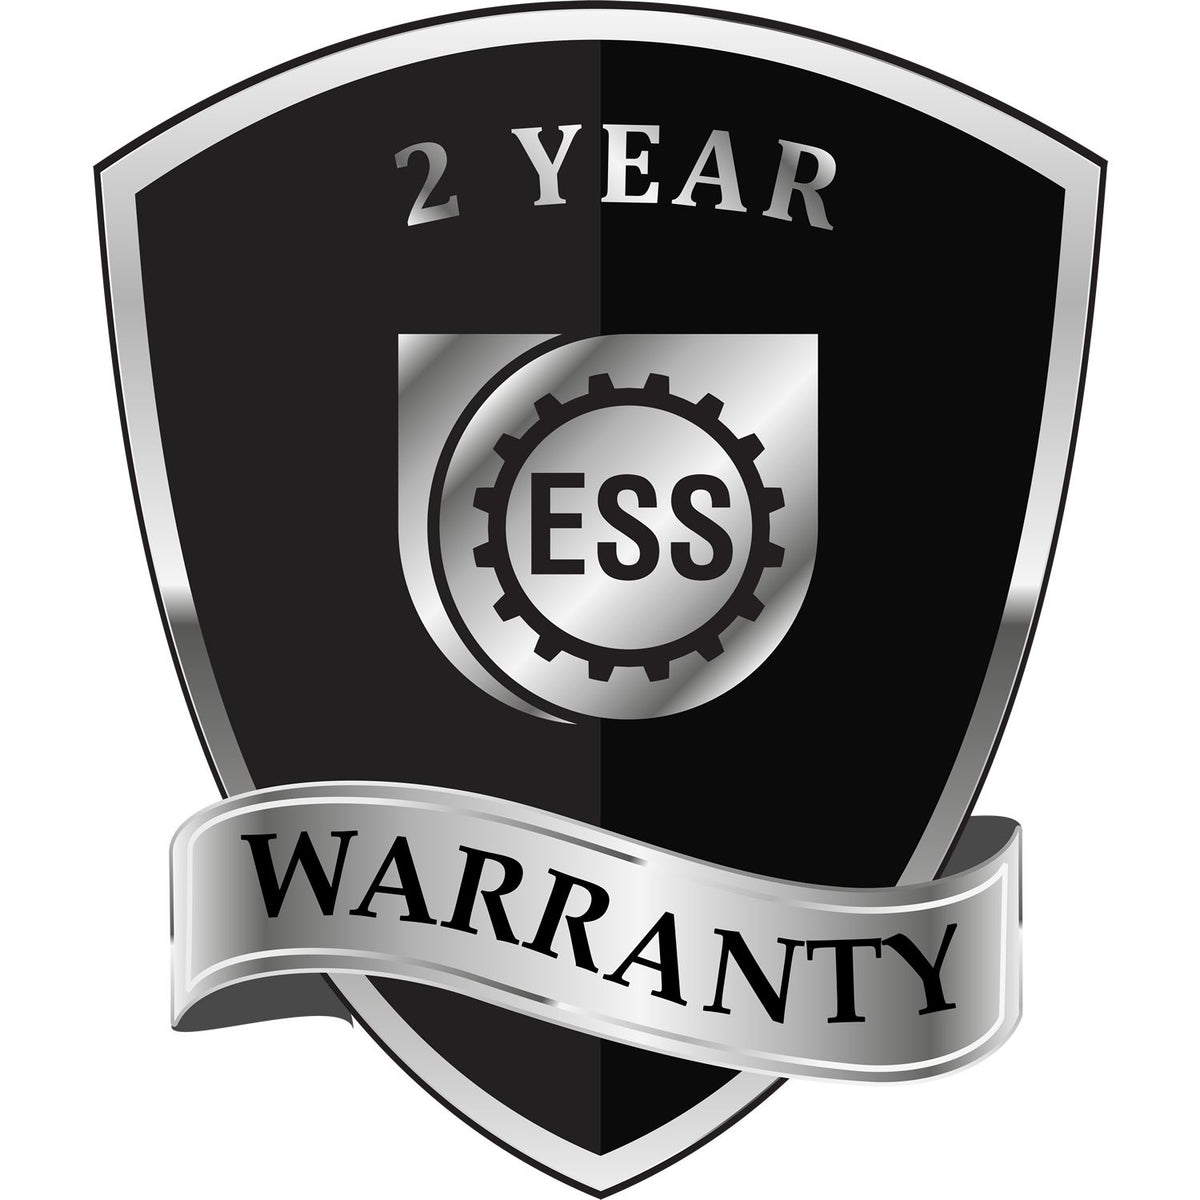 A black and silver badge or emblem showing warranty information for the Gift Illinois Engineer Seal